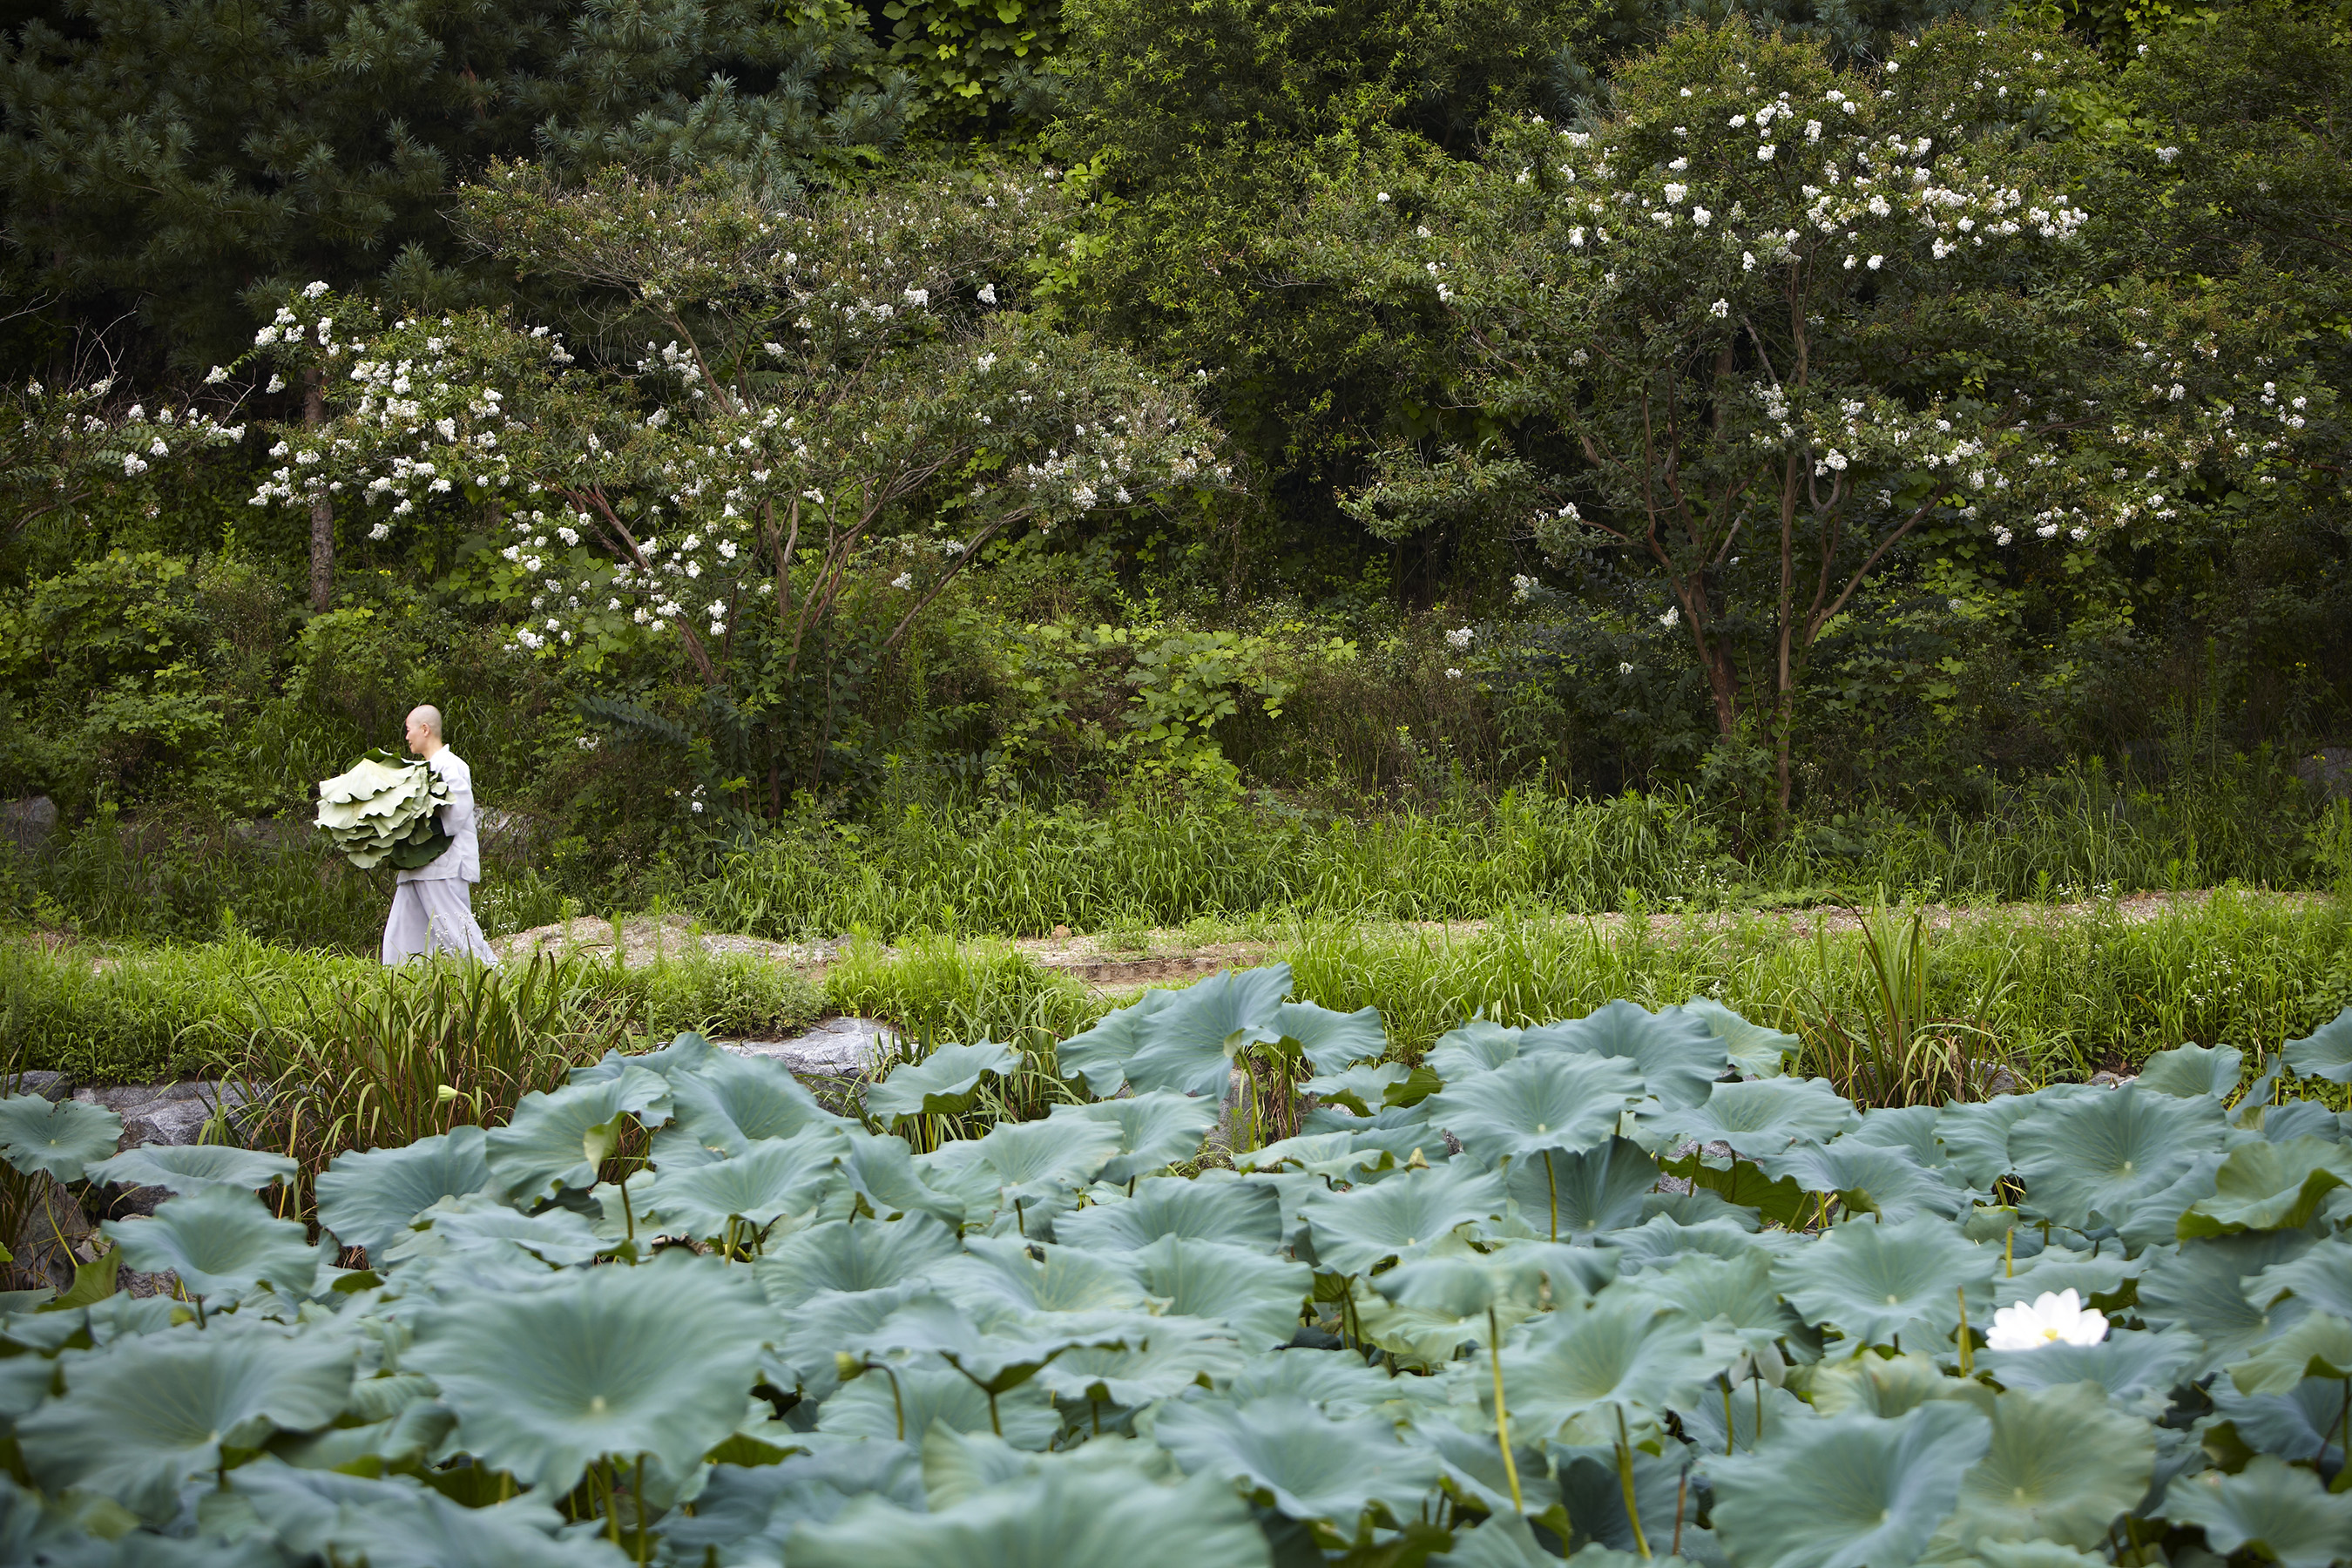 A monk is carrying a temple food ingredient harvested through eco-friendly cultivation